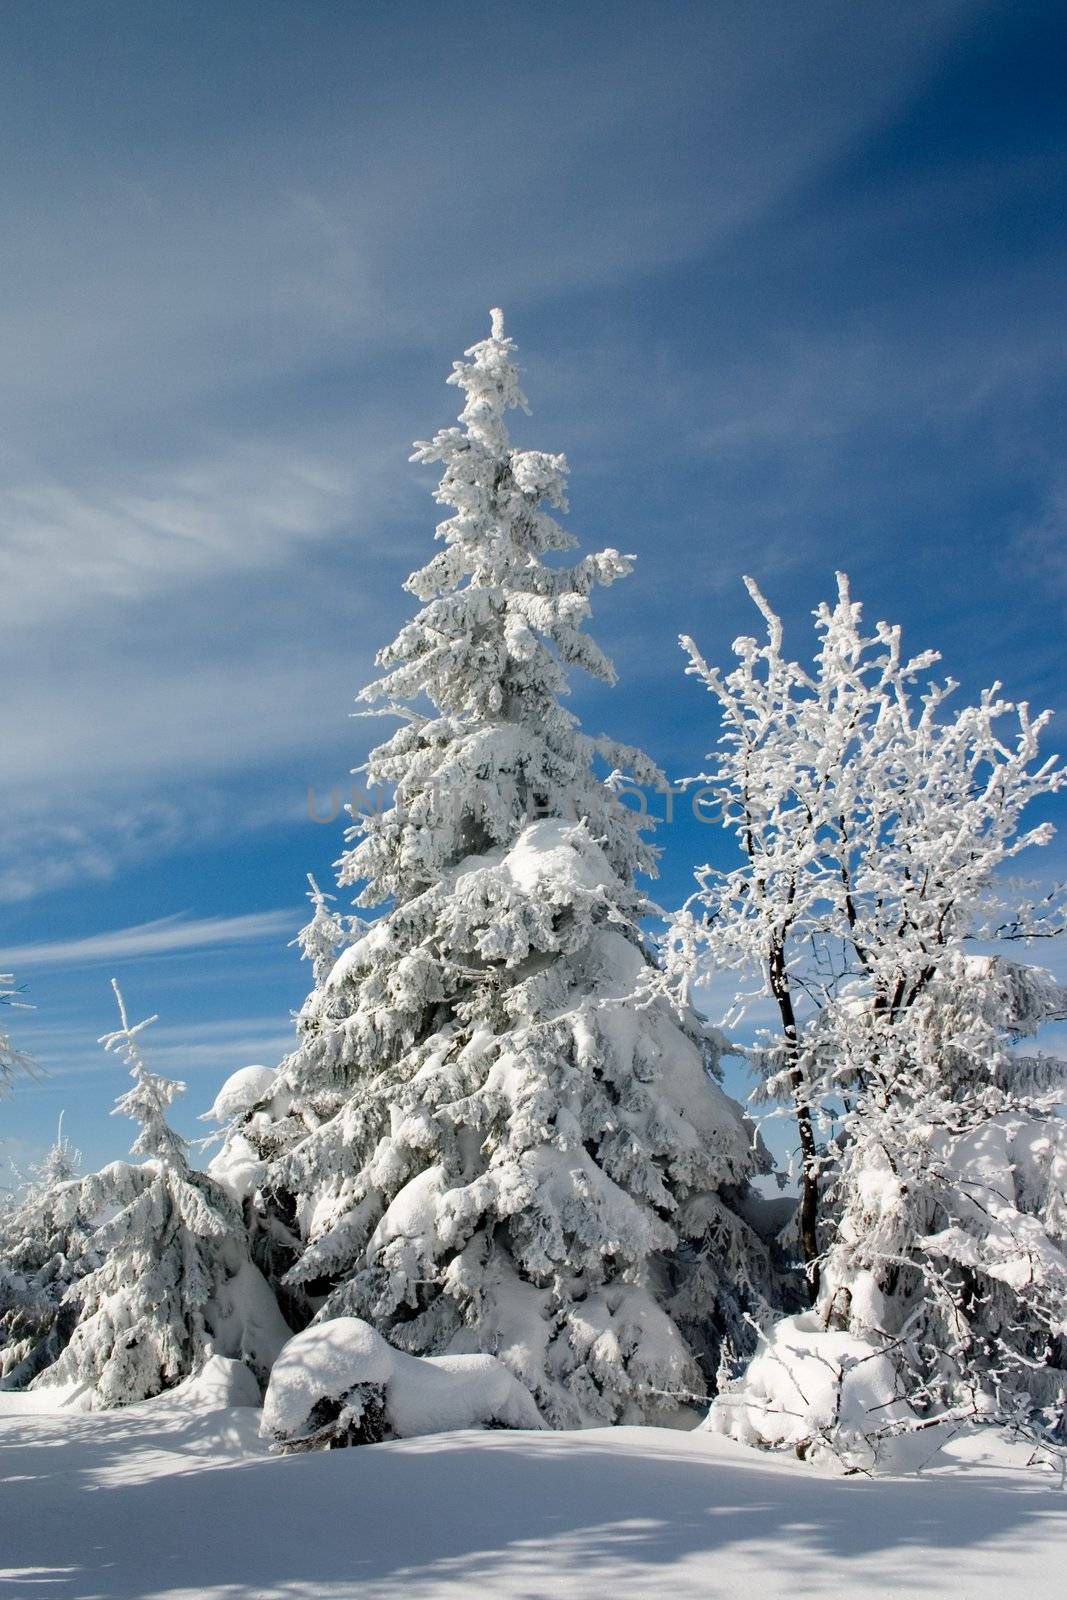 Snow trees in the winter mountains